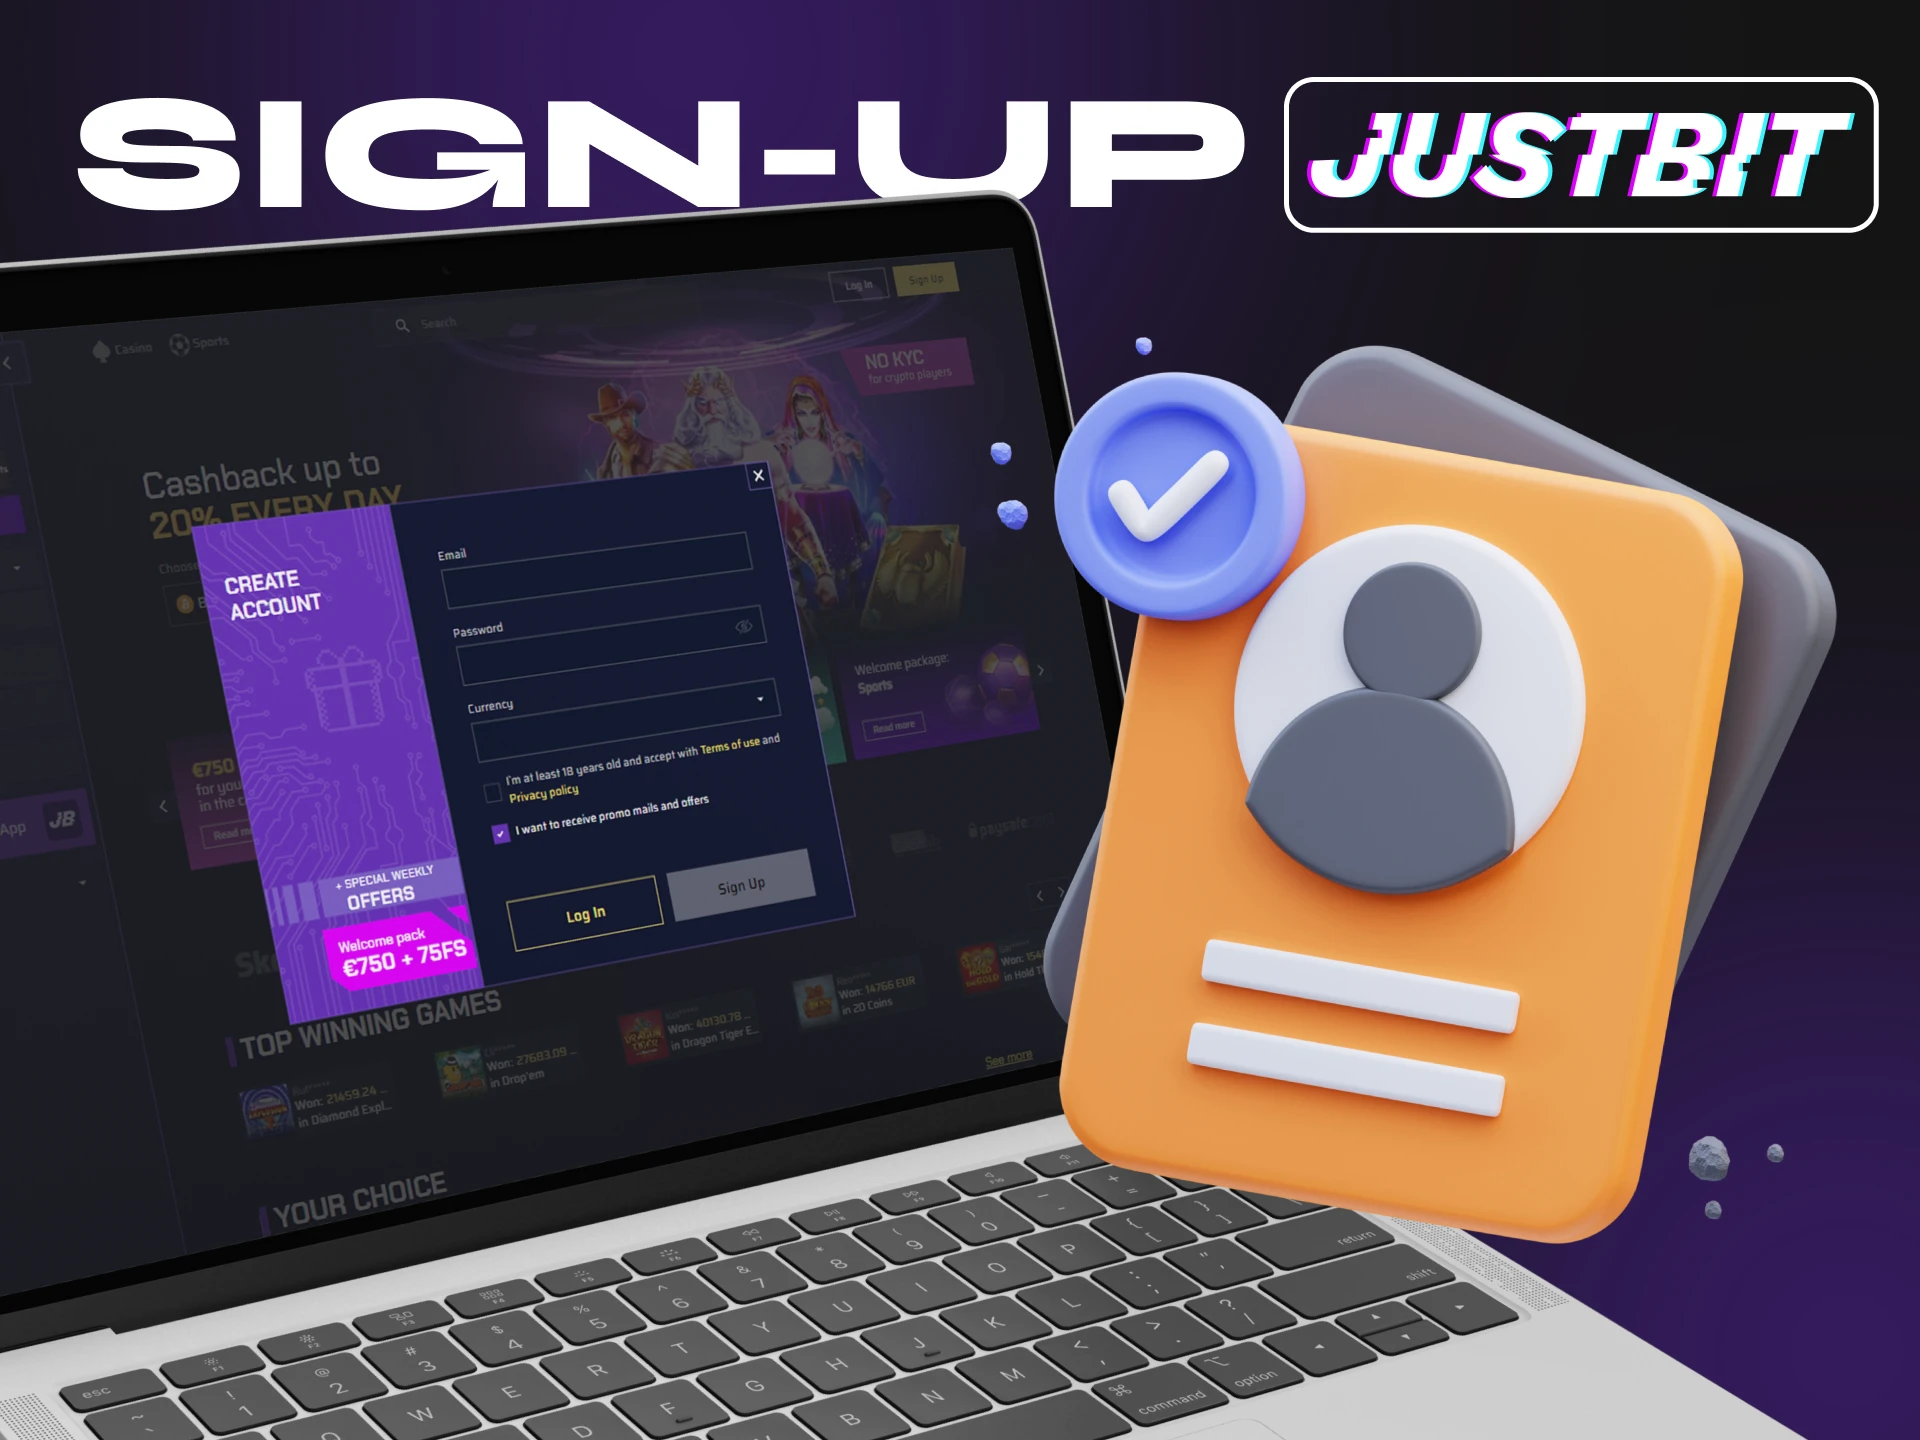 Registration is easy at Justbit Casino.